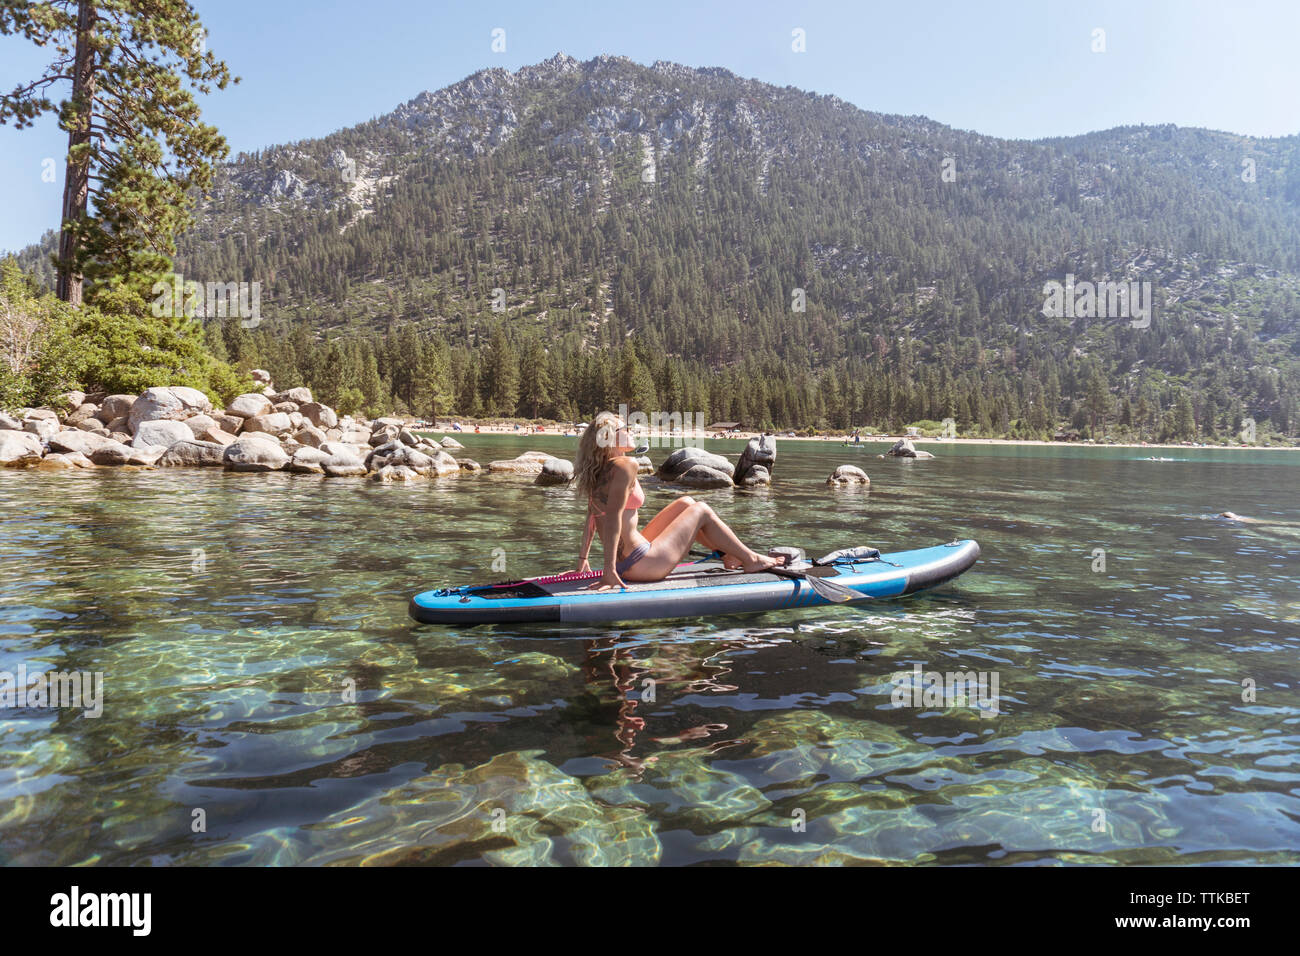 Side view of woman in bikini paddleboarding on lake against mountain during sunny day Stock Photo